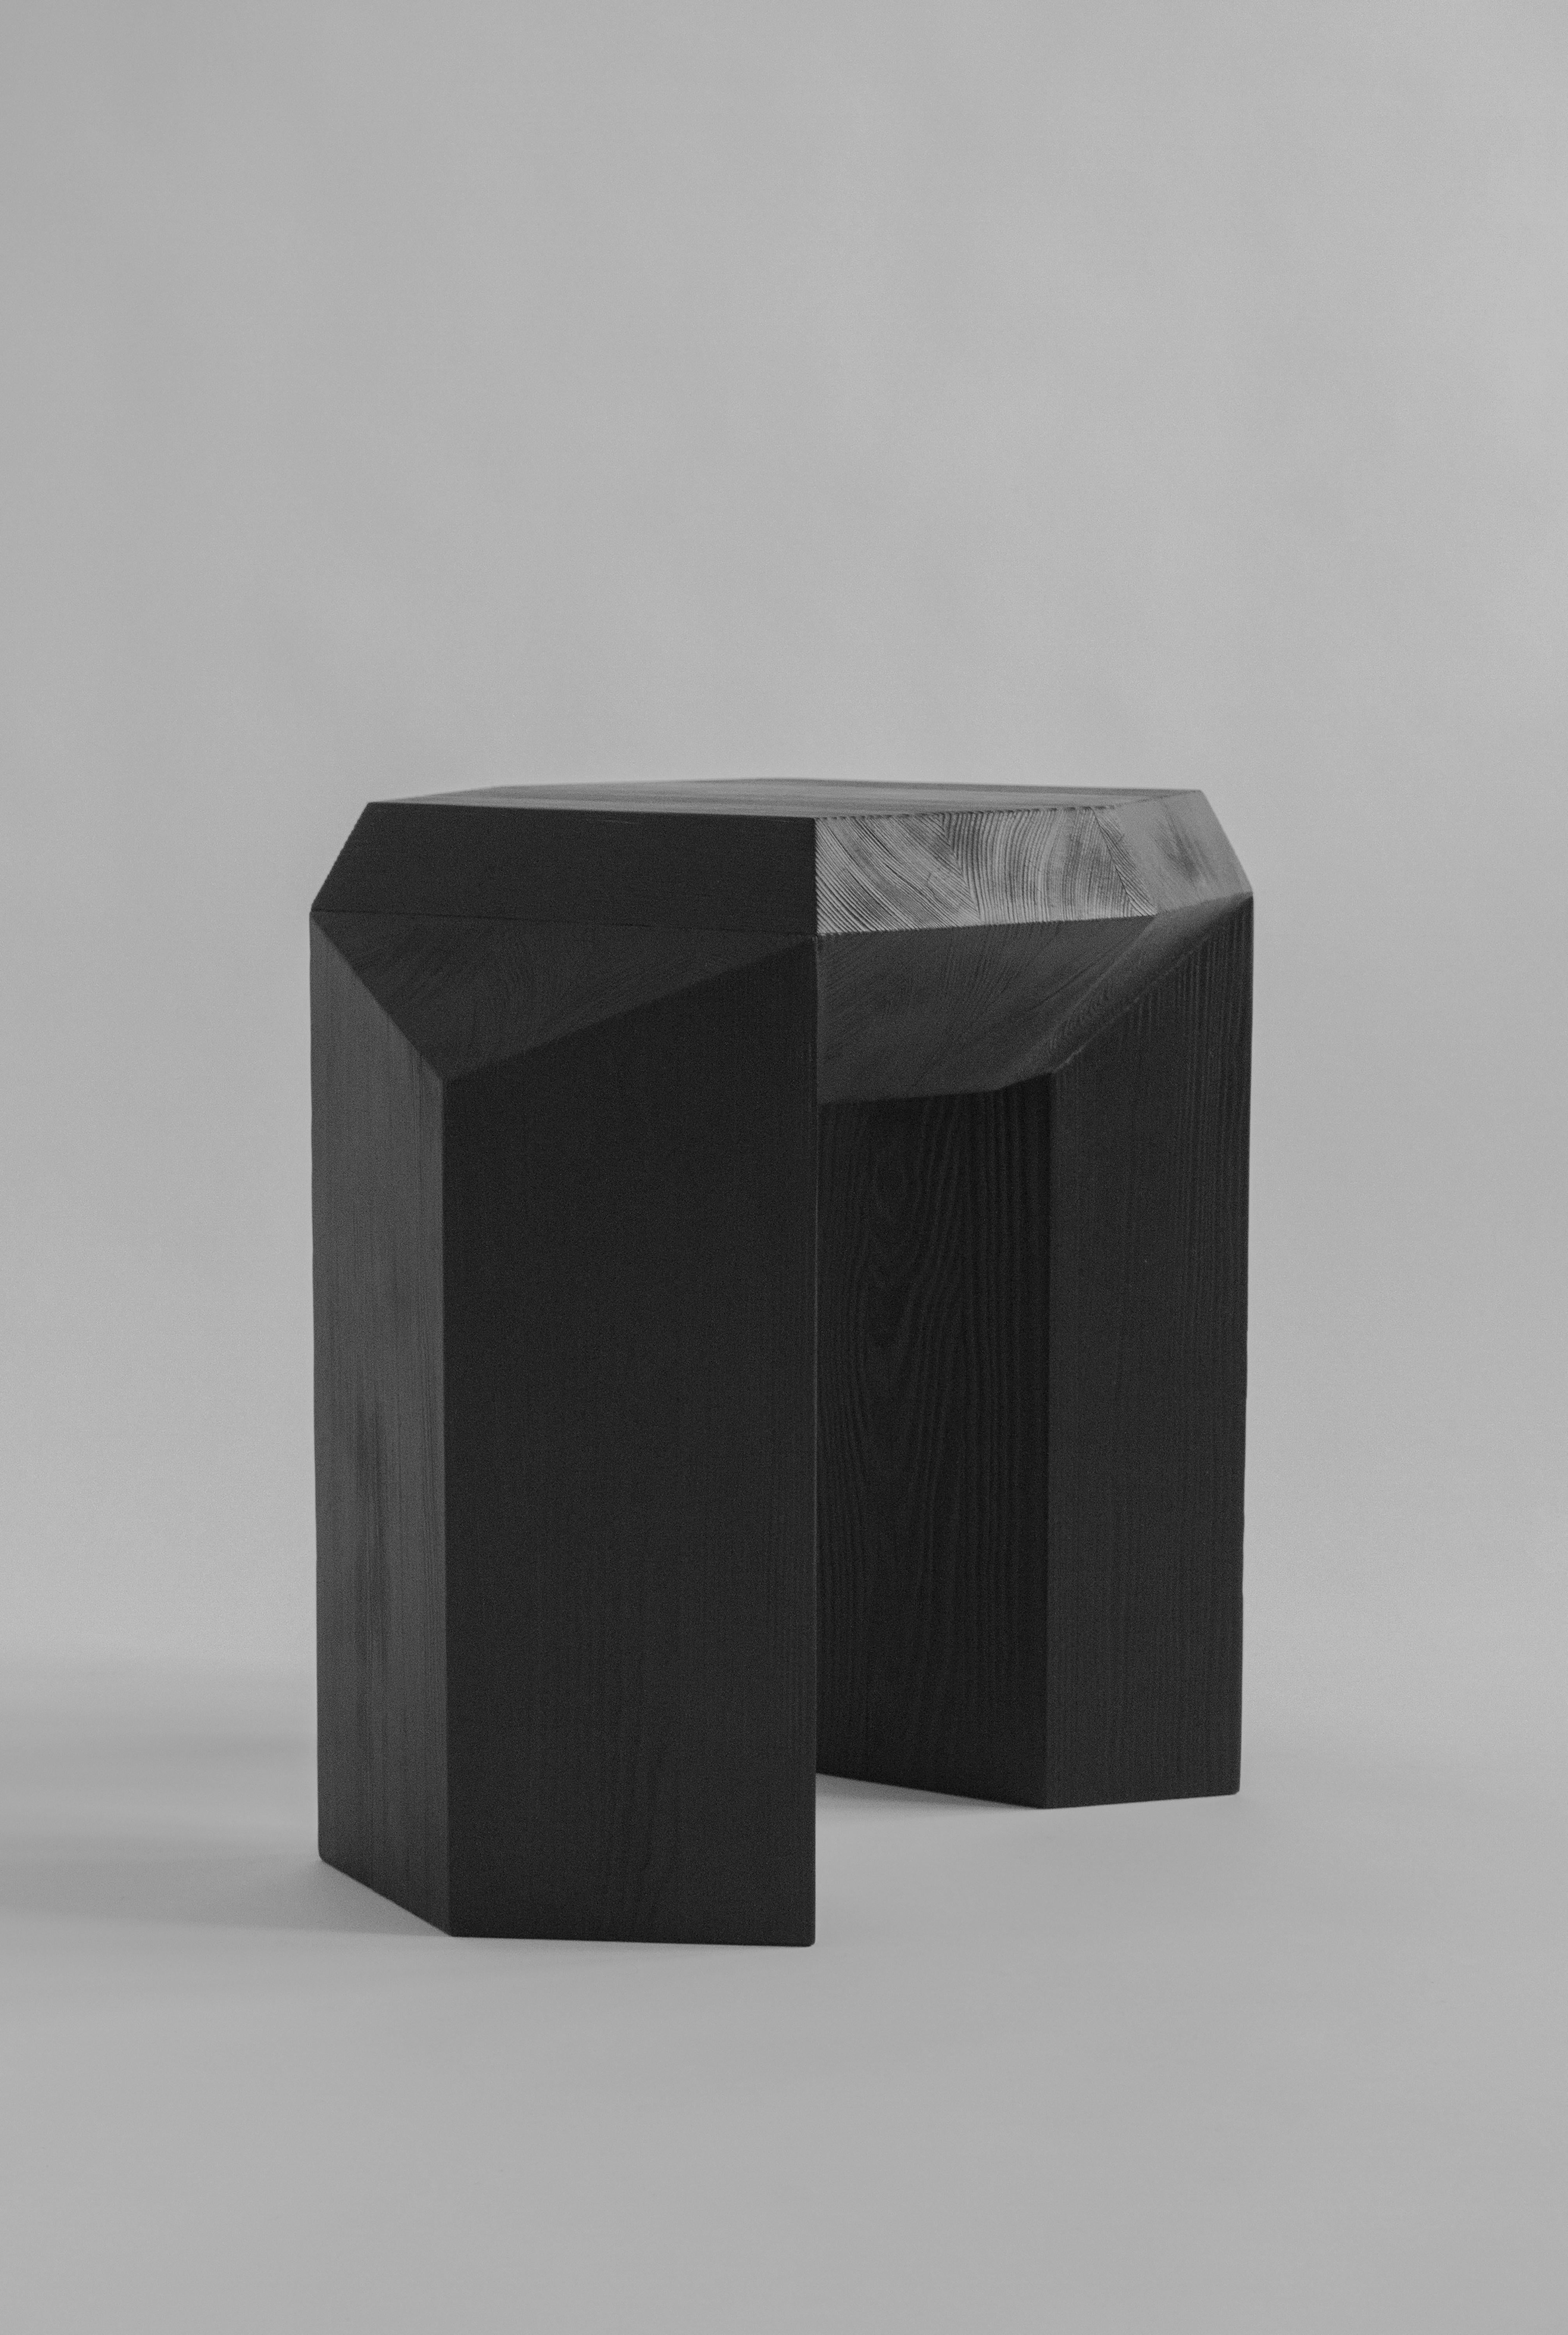 Burned Ode side table by Sizar Alexis
Signed and Numered
Edition of 12
Dimensions: Length 44 x width 35 x height 40 cm
Materials: Burned pine wood

The hexagon has more to it than we think, and some of the aspects of this shape are